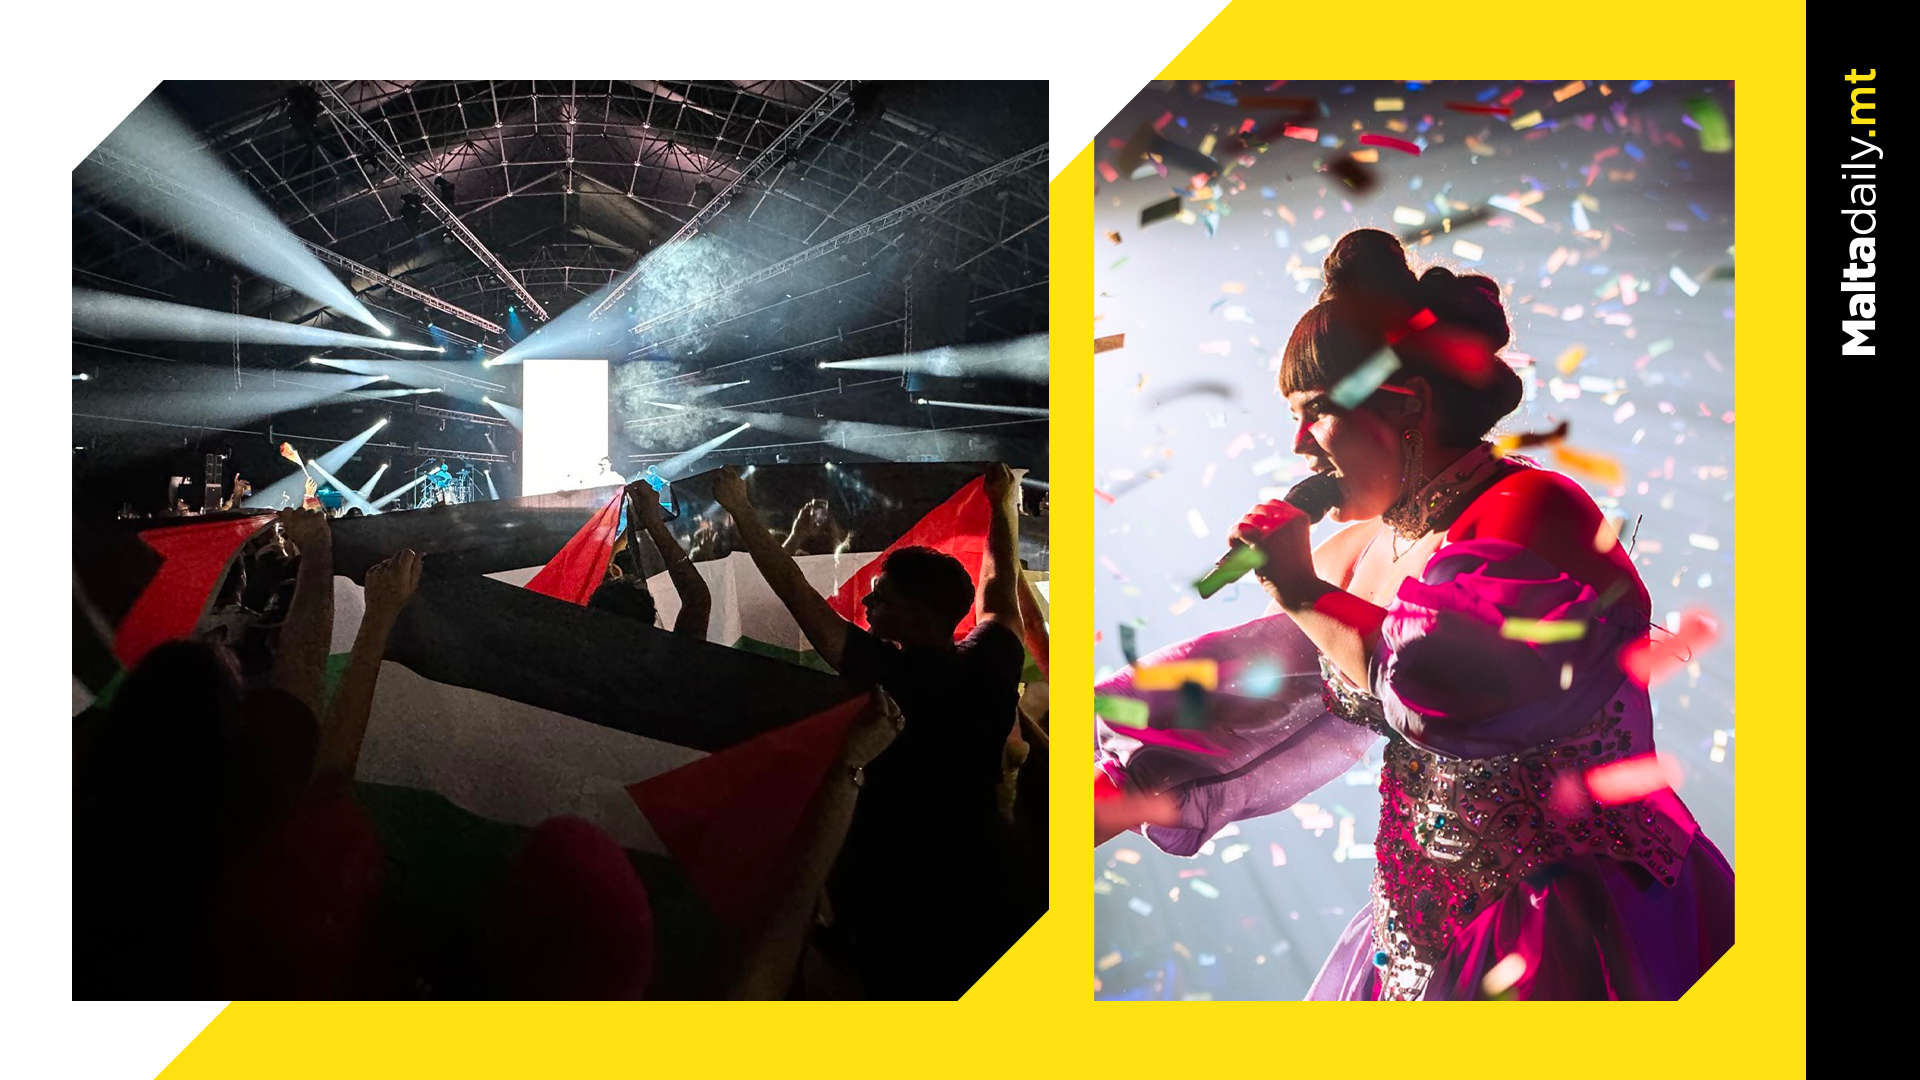 Activists Raise Palestinian Flags in Protest During Netta’s EuroPride Performance